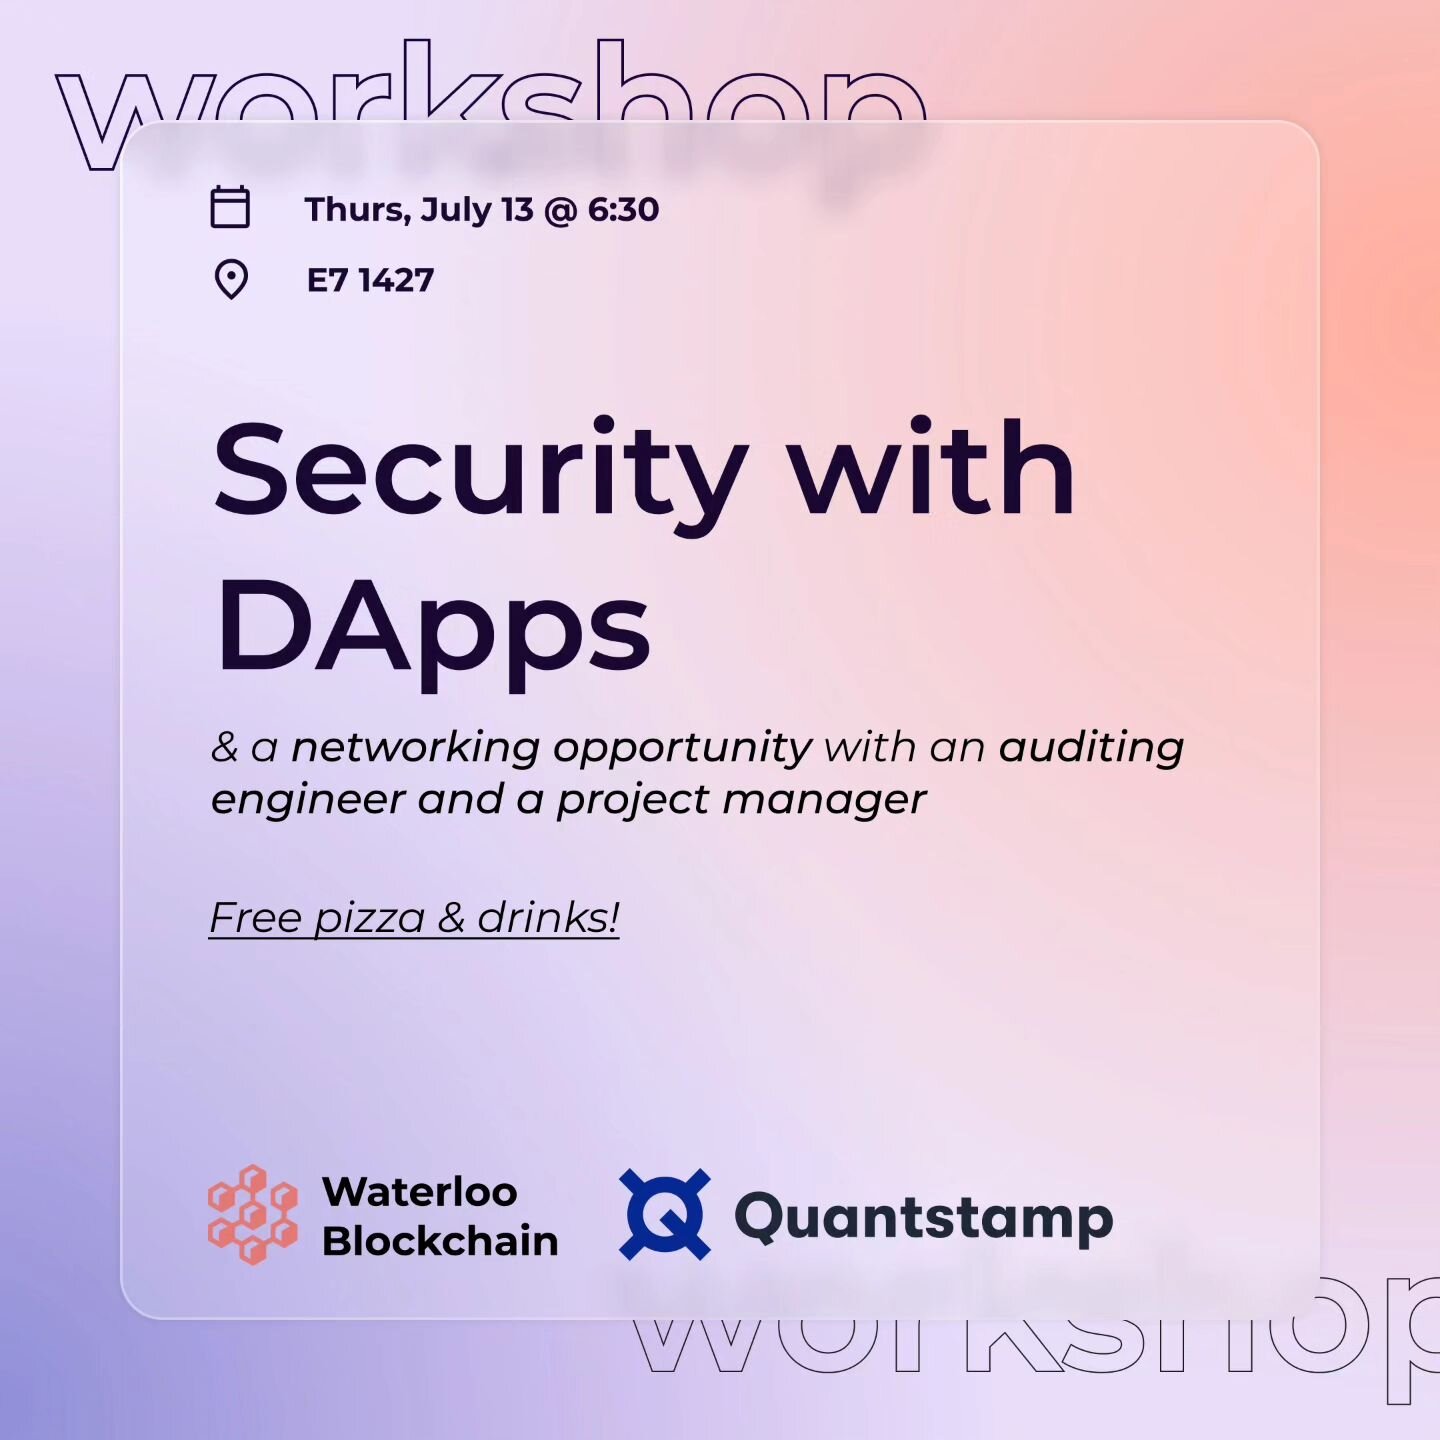 Join us for a thrilling workshop on Security with DApps, hosted by Quantstamp! 😎

📅 Date: July 13th, 2023
⏰ Time: 6.30pm ET
📍 Location: E7 1427 (IDEAs Clinic)

🔒 Learn from the best in the industry as experts from Quantstamp share their insights 